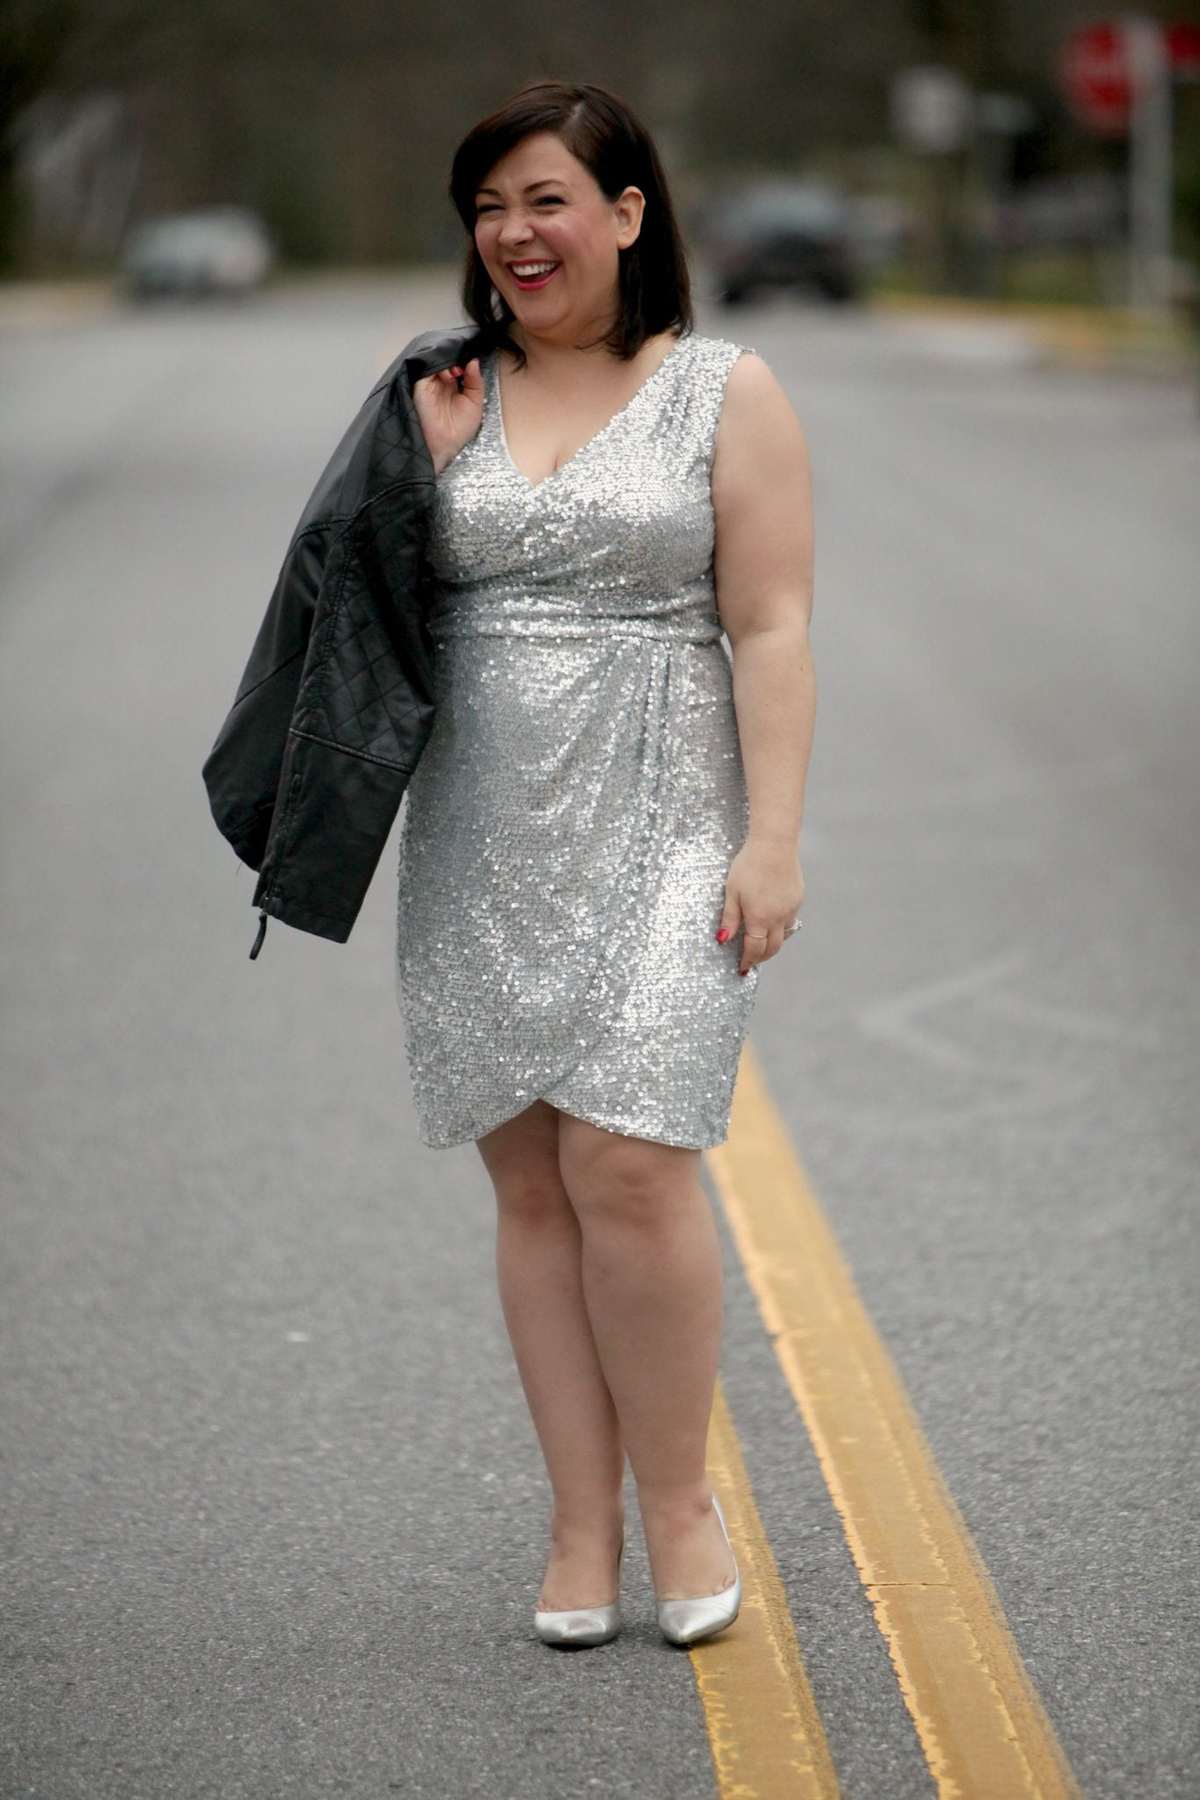 Why I Donated a Flattering Dress